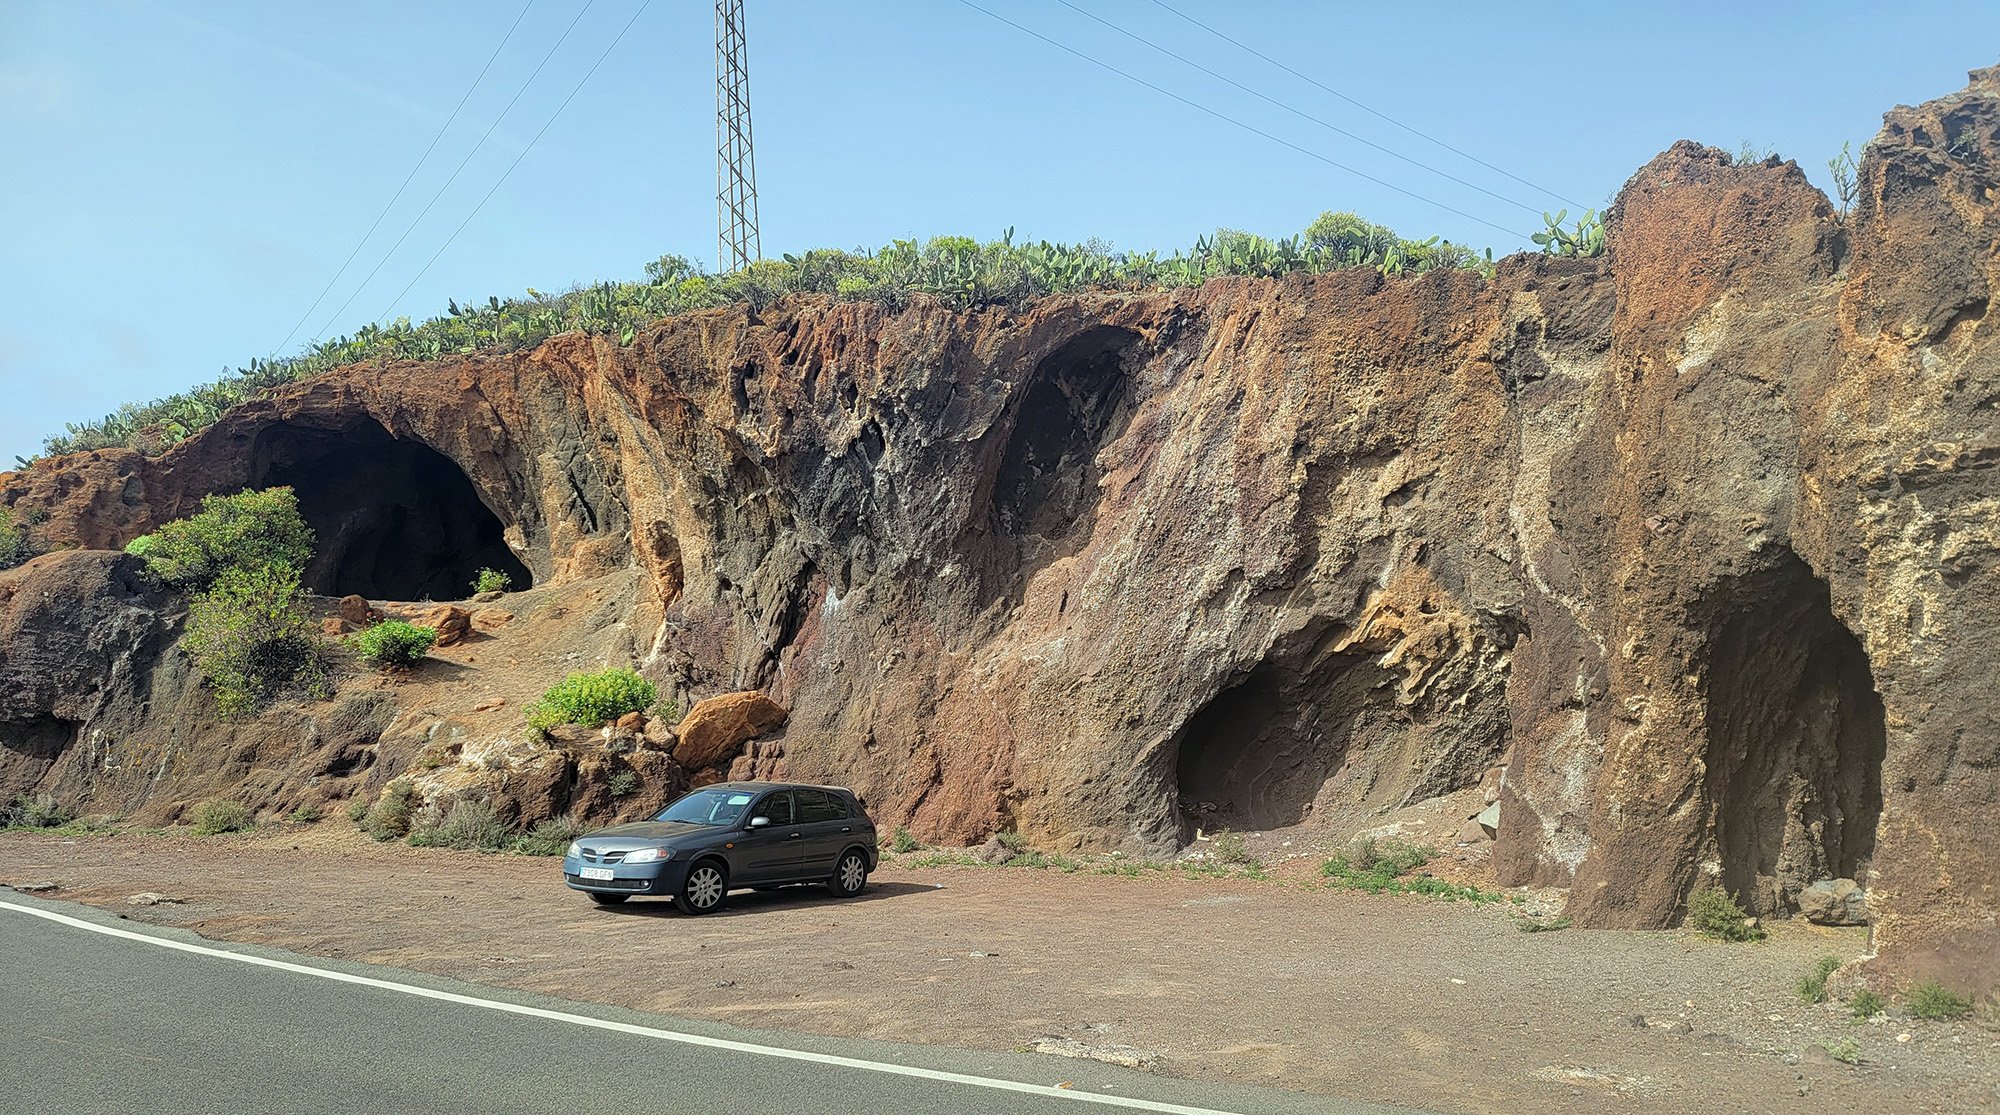 Like on Tenerife, all the rocks are full of holes and caves. Good place to stop if it rains.